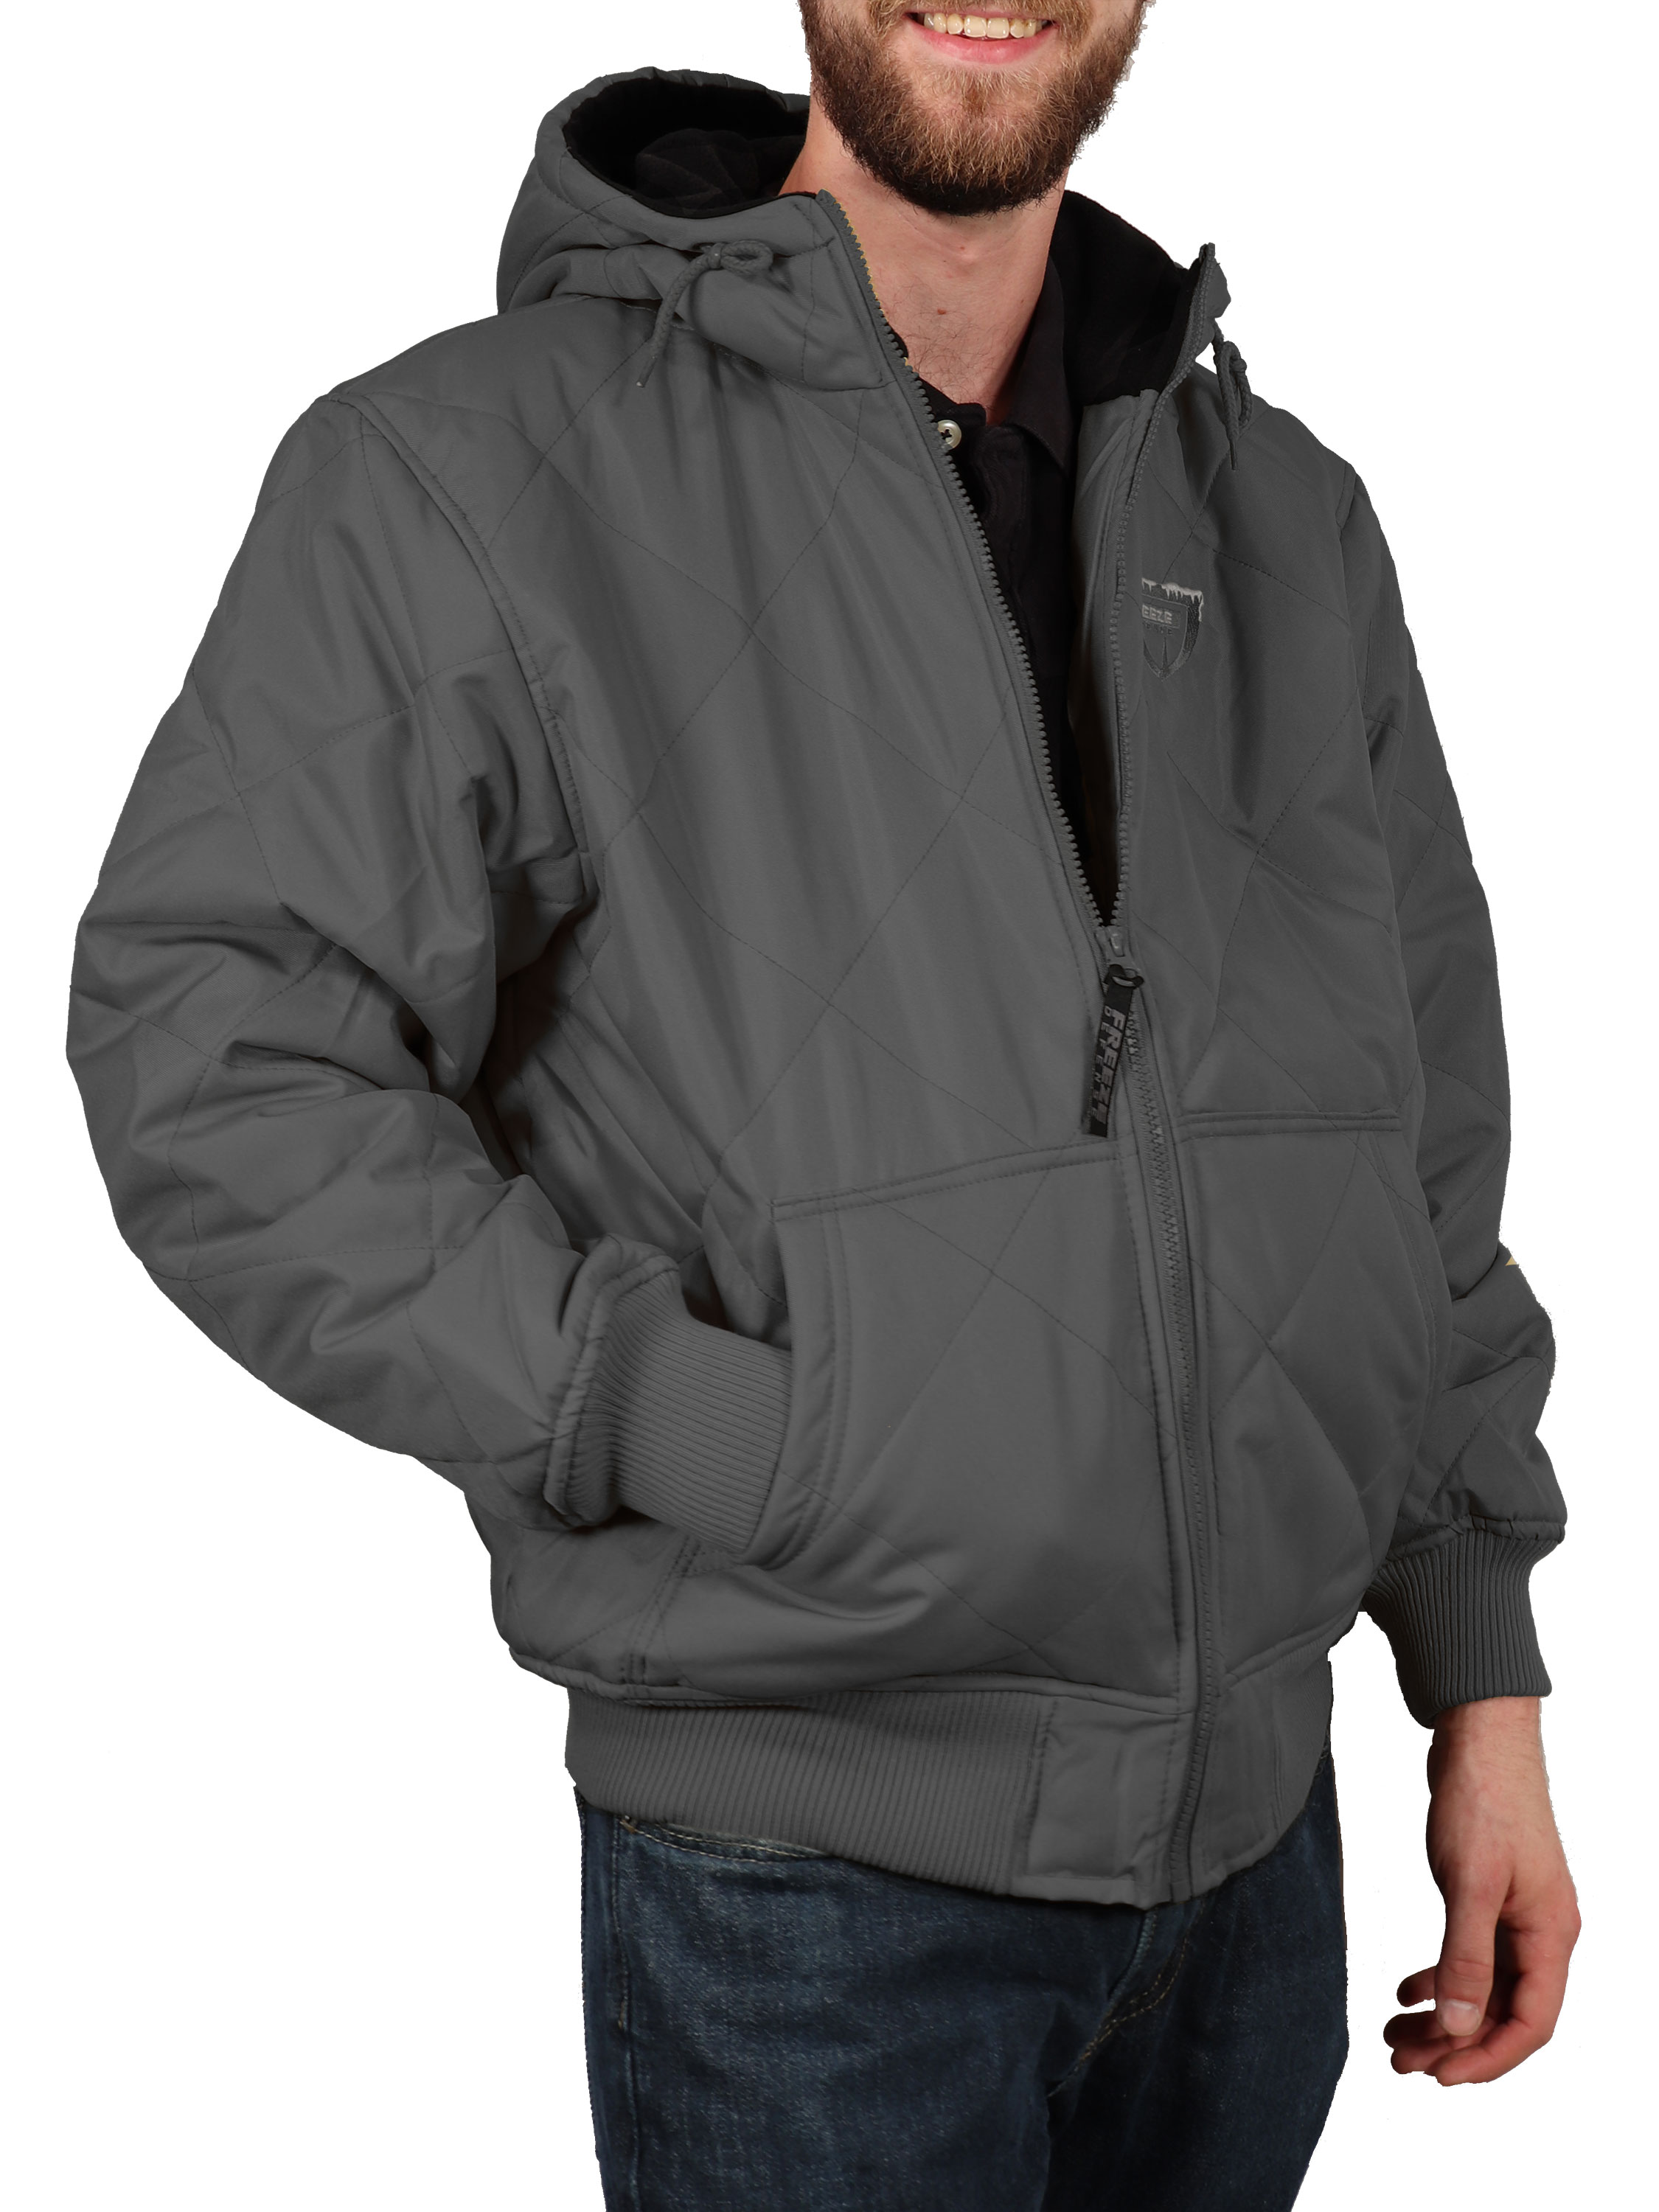 Pivaconis Mens Thicken Hooded Classic Quilted Zipper Fleece Jacket Parka Coat 